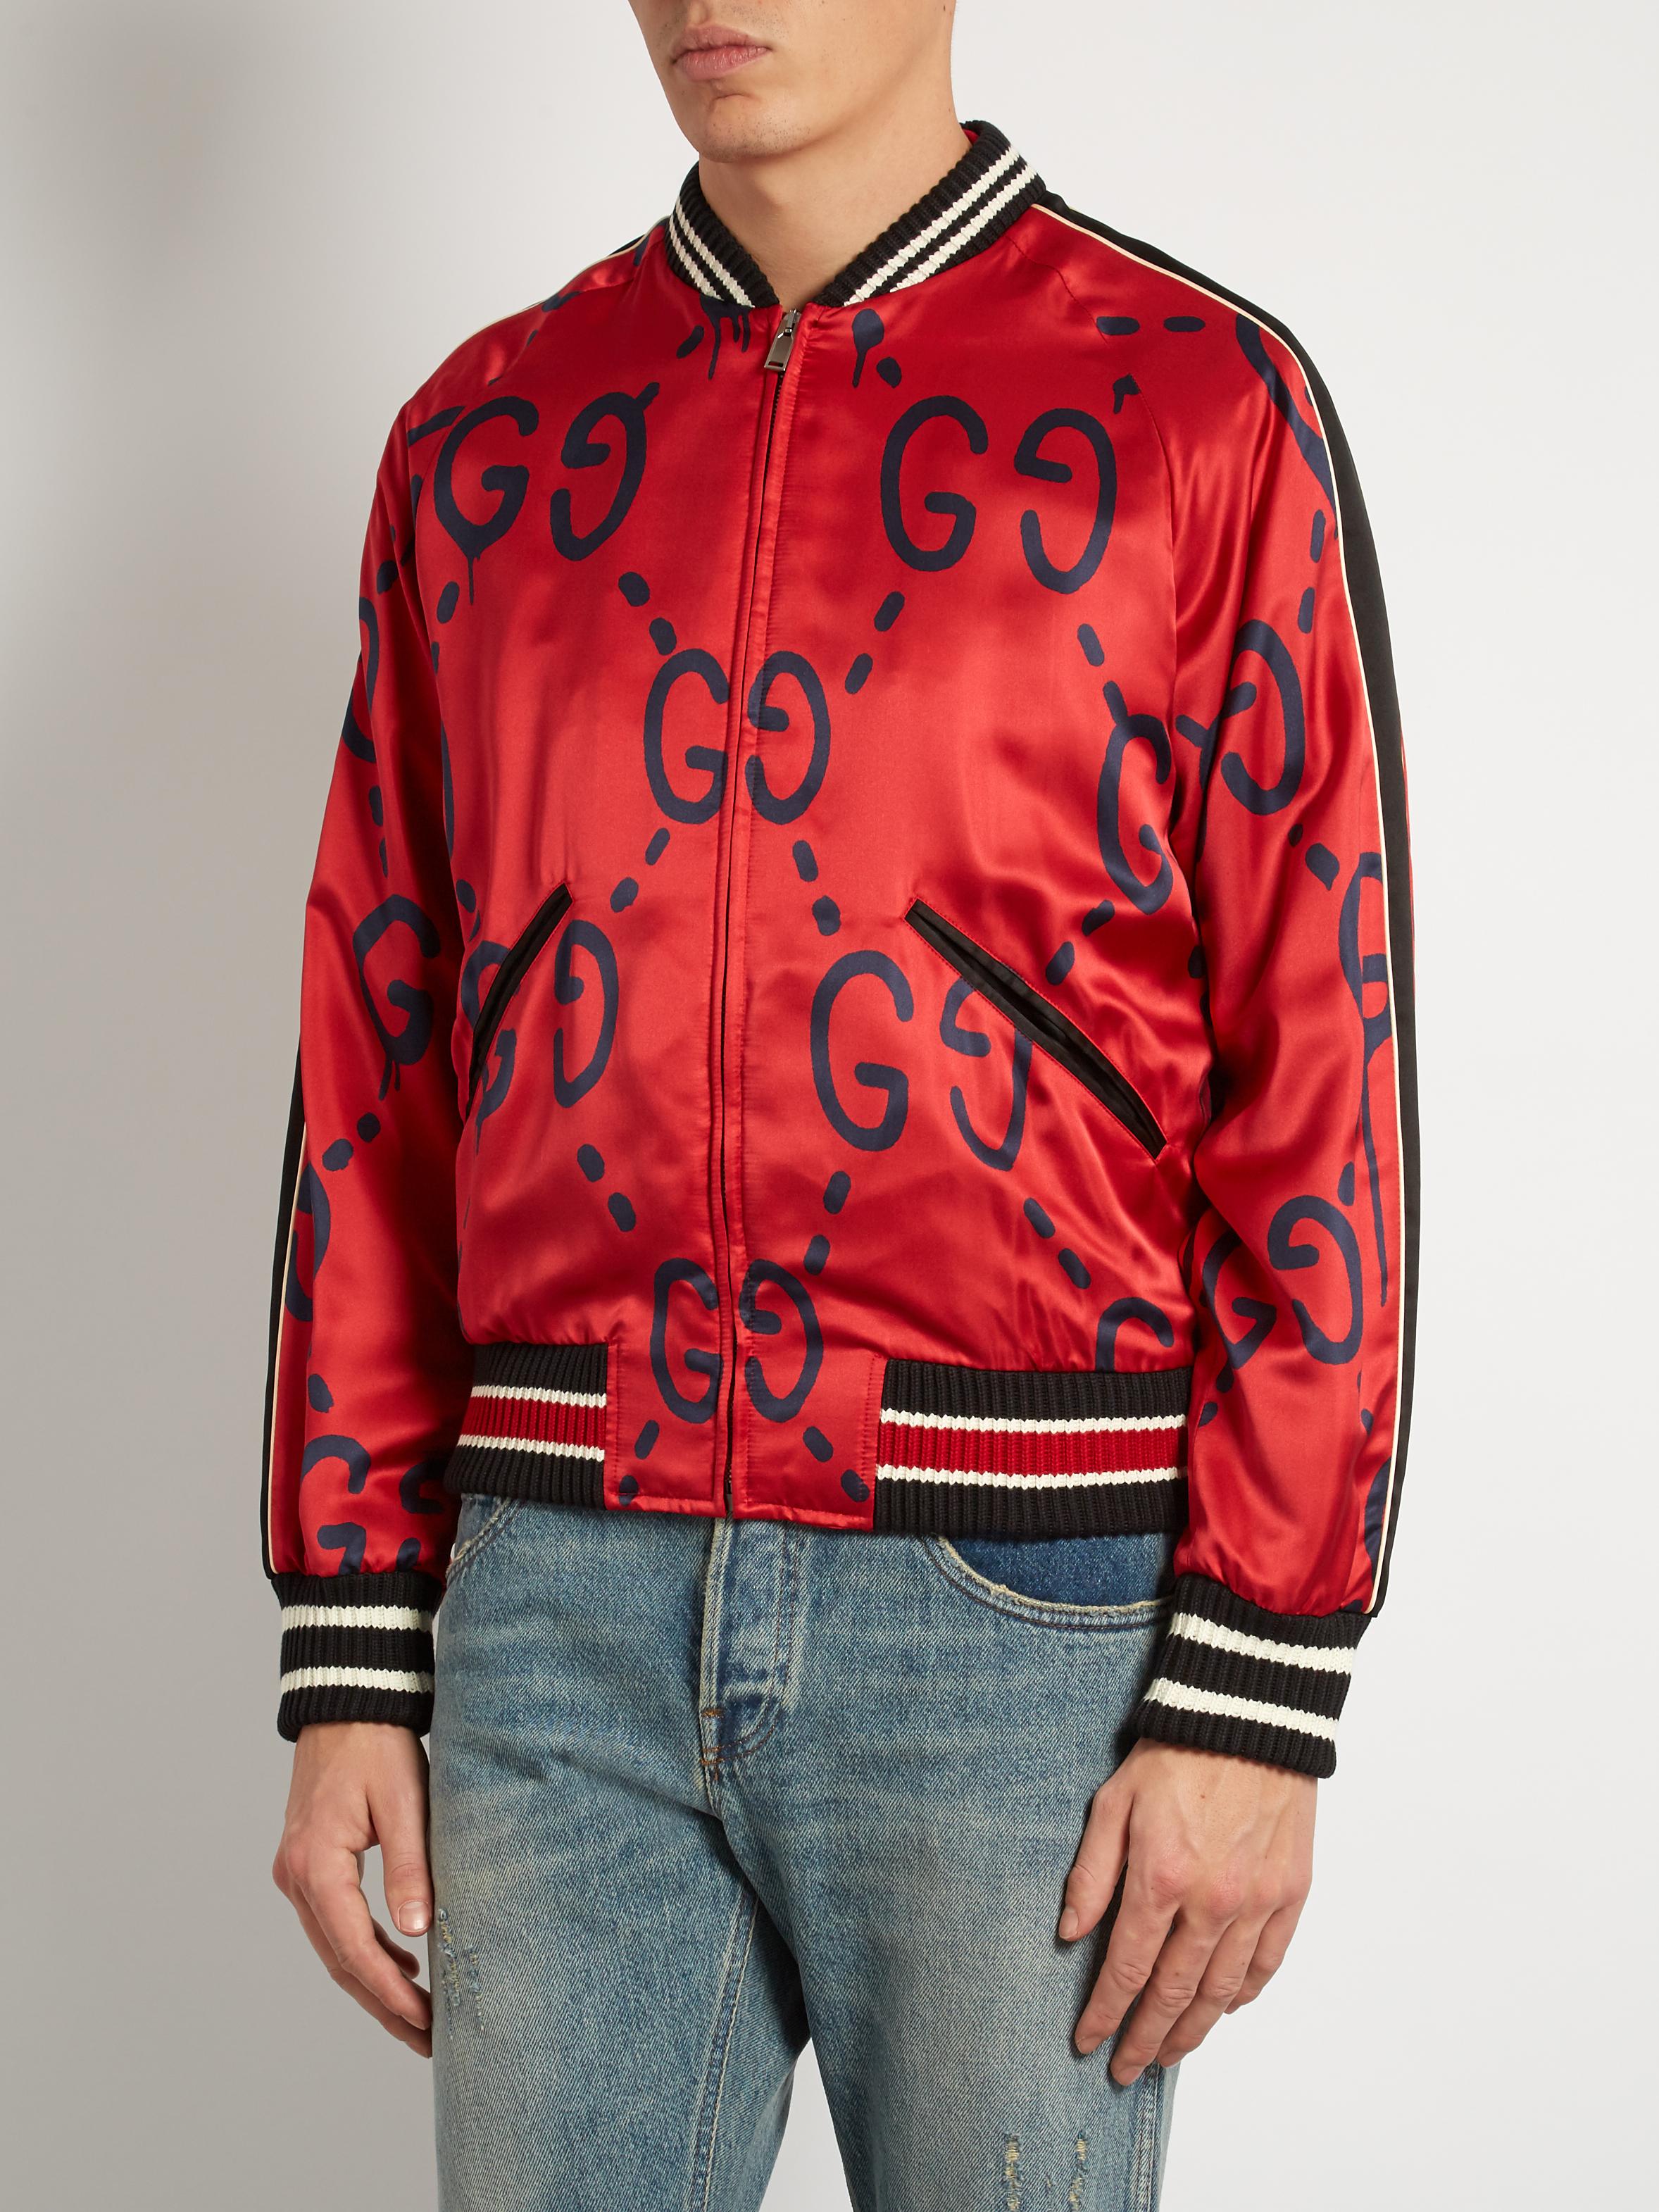 Gucci Ghost-print Satin Duchesse Bomber Jacket in Red for Men - Lyst